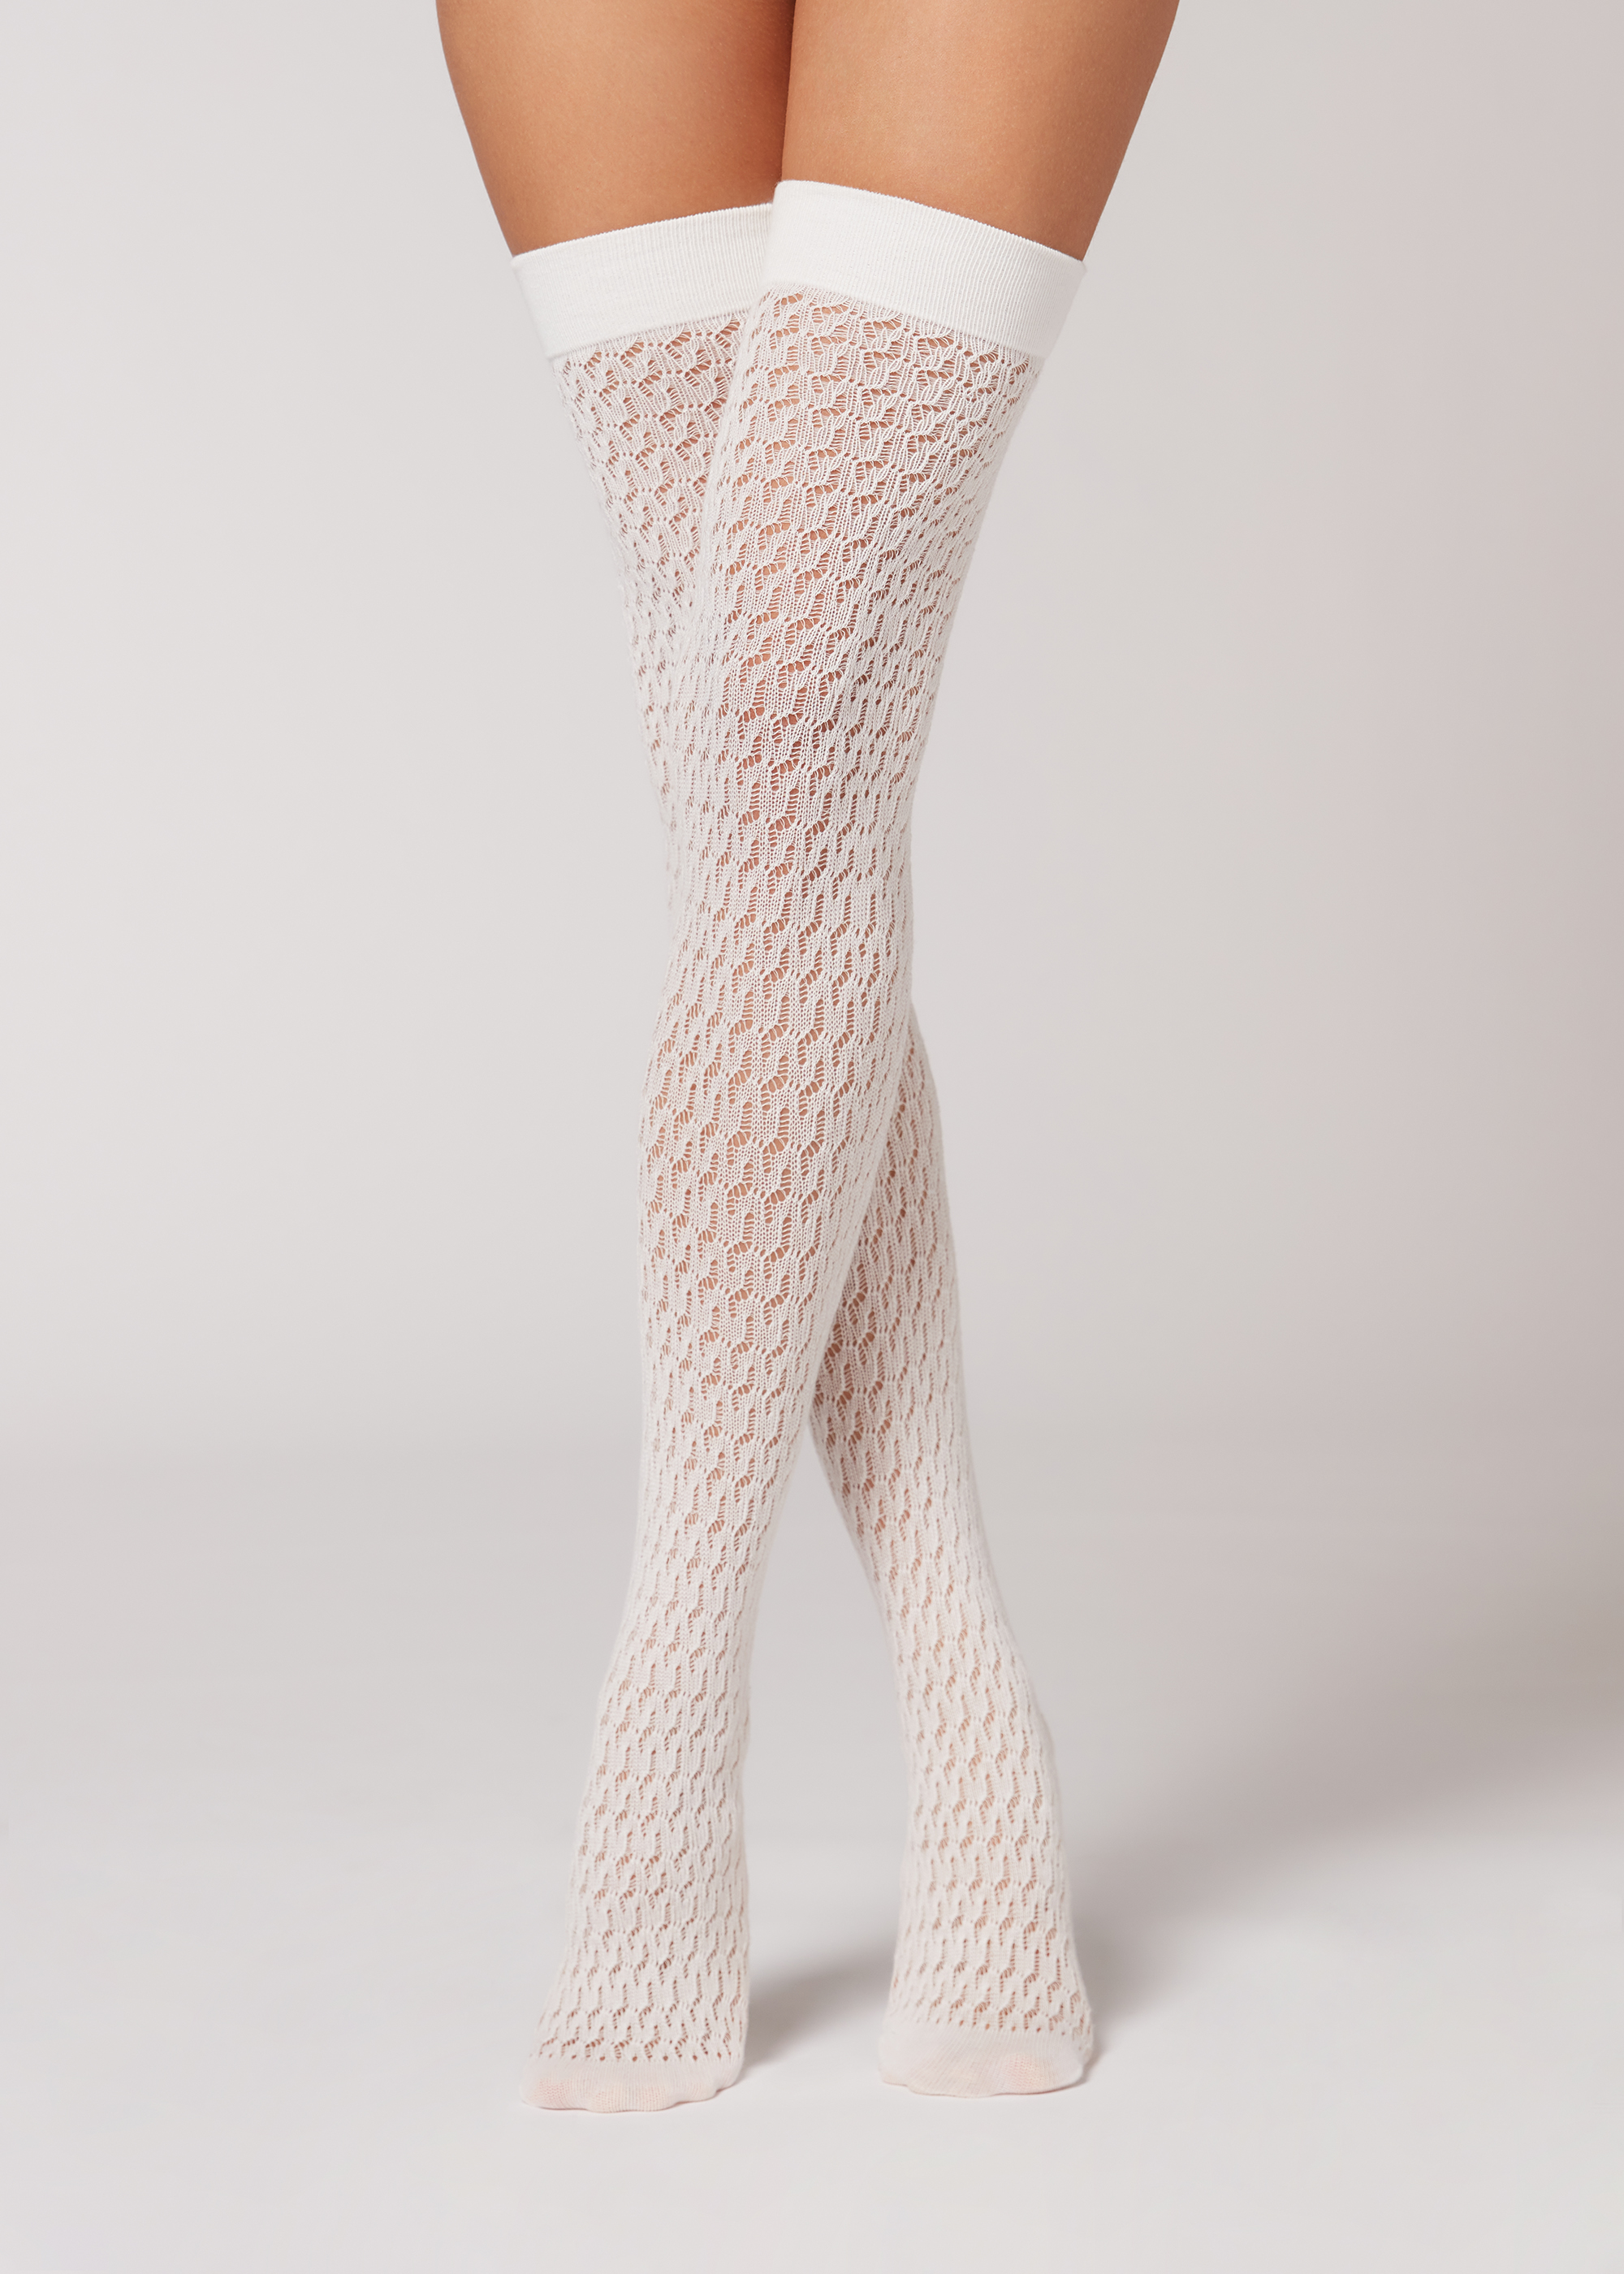 Textured Cotton Over-the-Knee Socks - Calzedonia